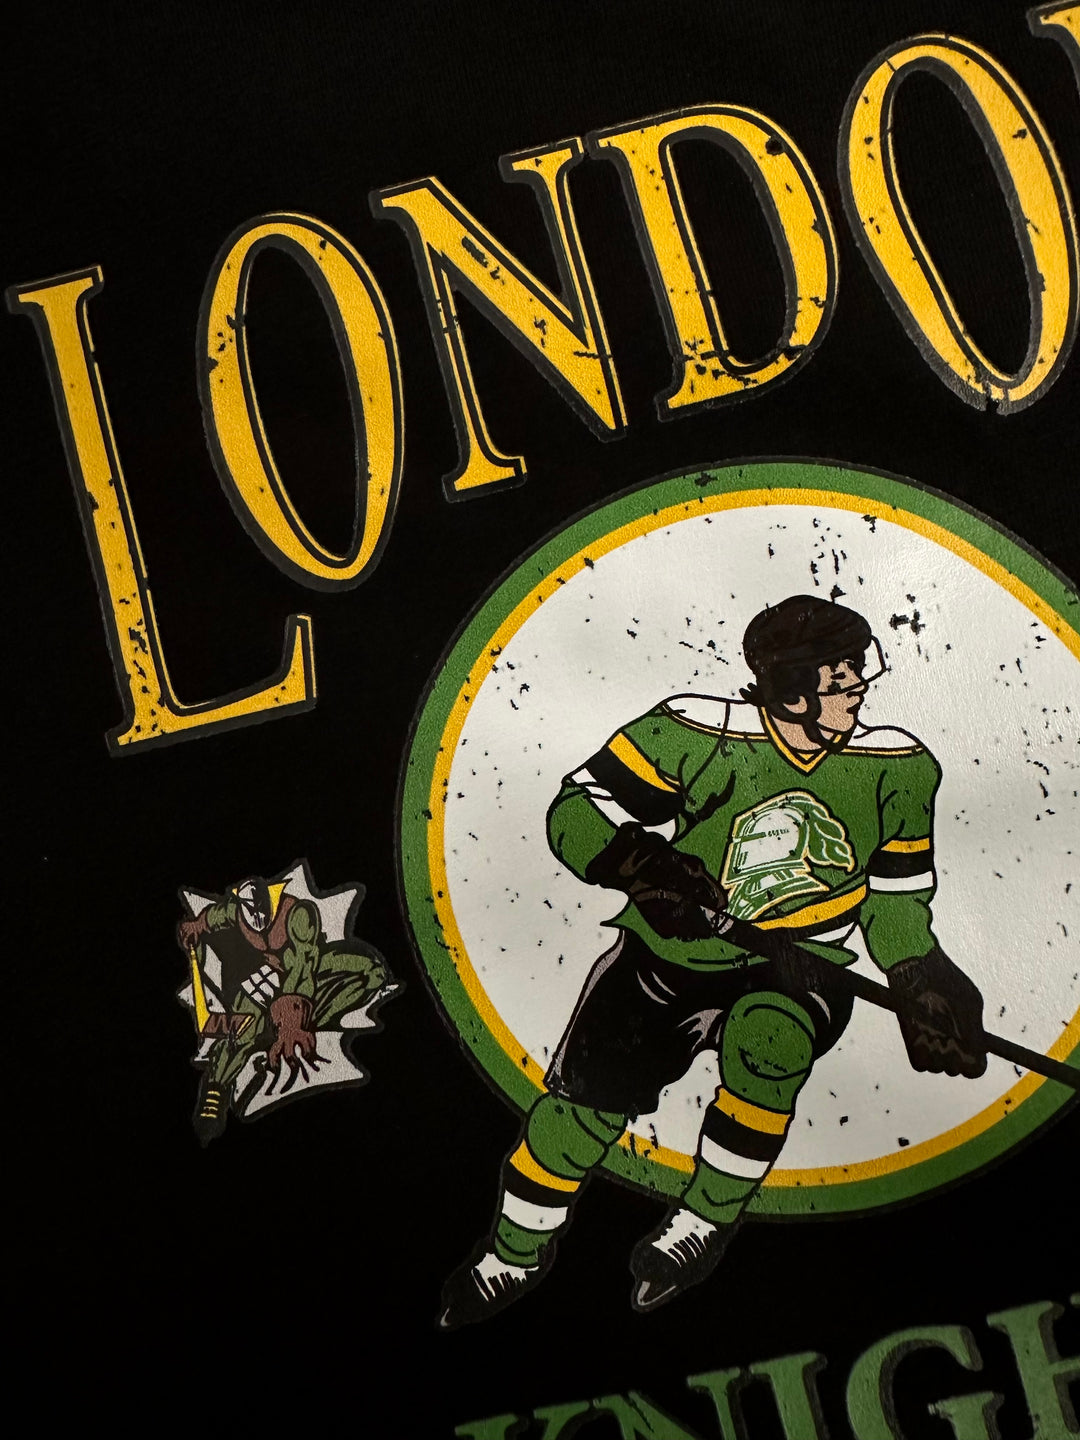 Celebrating the London Knights OHL Championship Victory and Their Journey to the Memorial Cup!